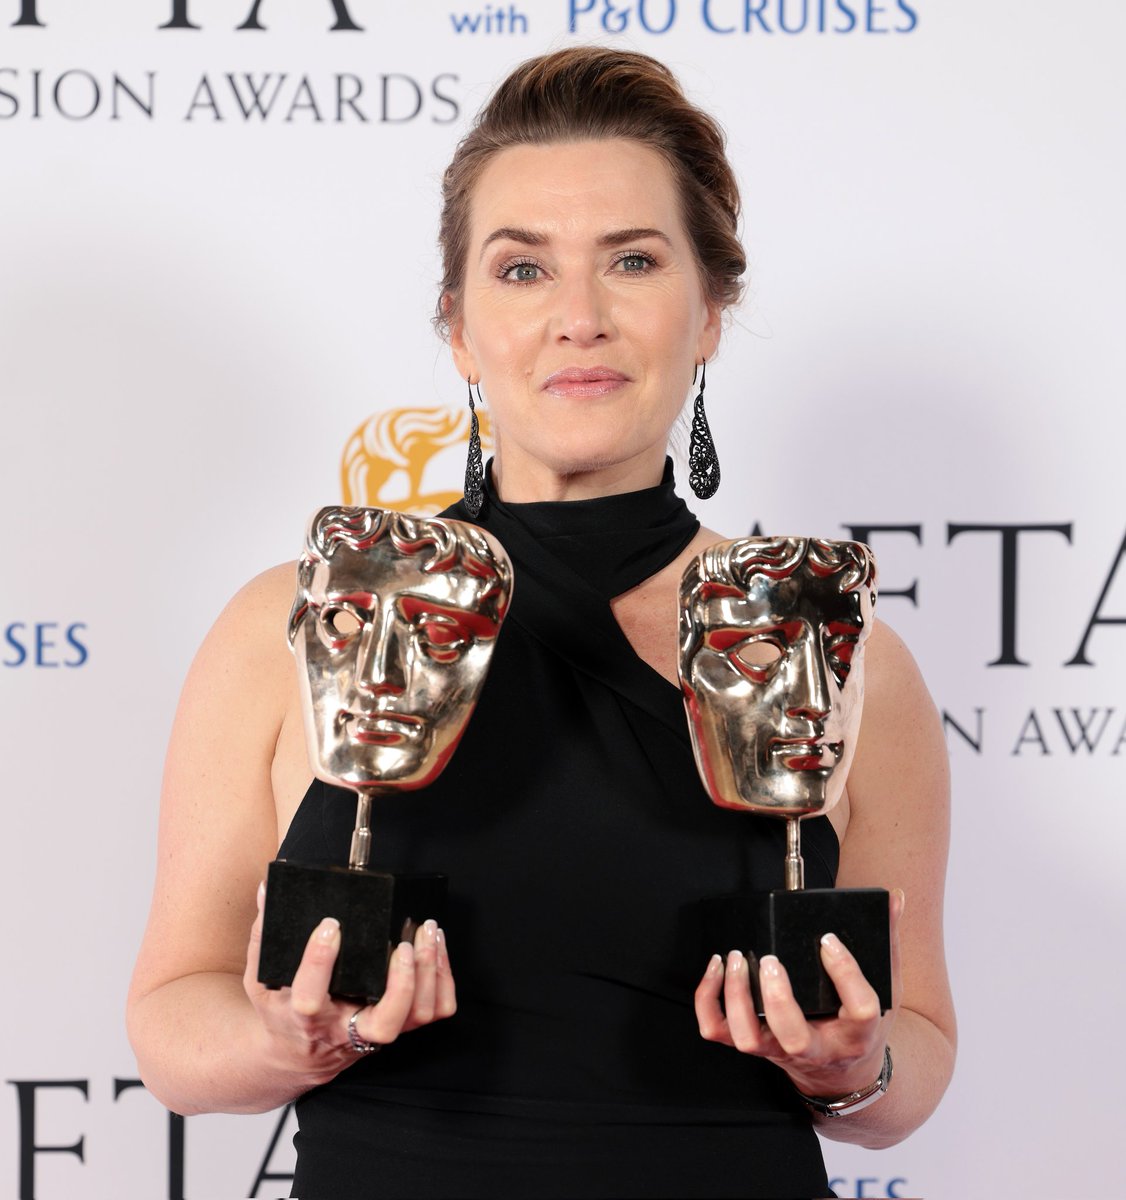 Kate Winslet and her awards for #BAFTATVAwards for drama I Am Ruth.

She also thanked her daughter Mia Threapleton who starred alongside her.